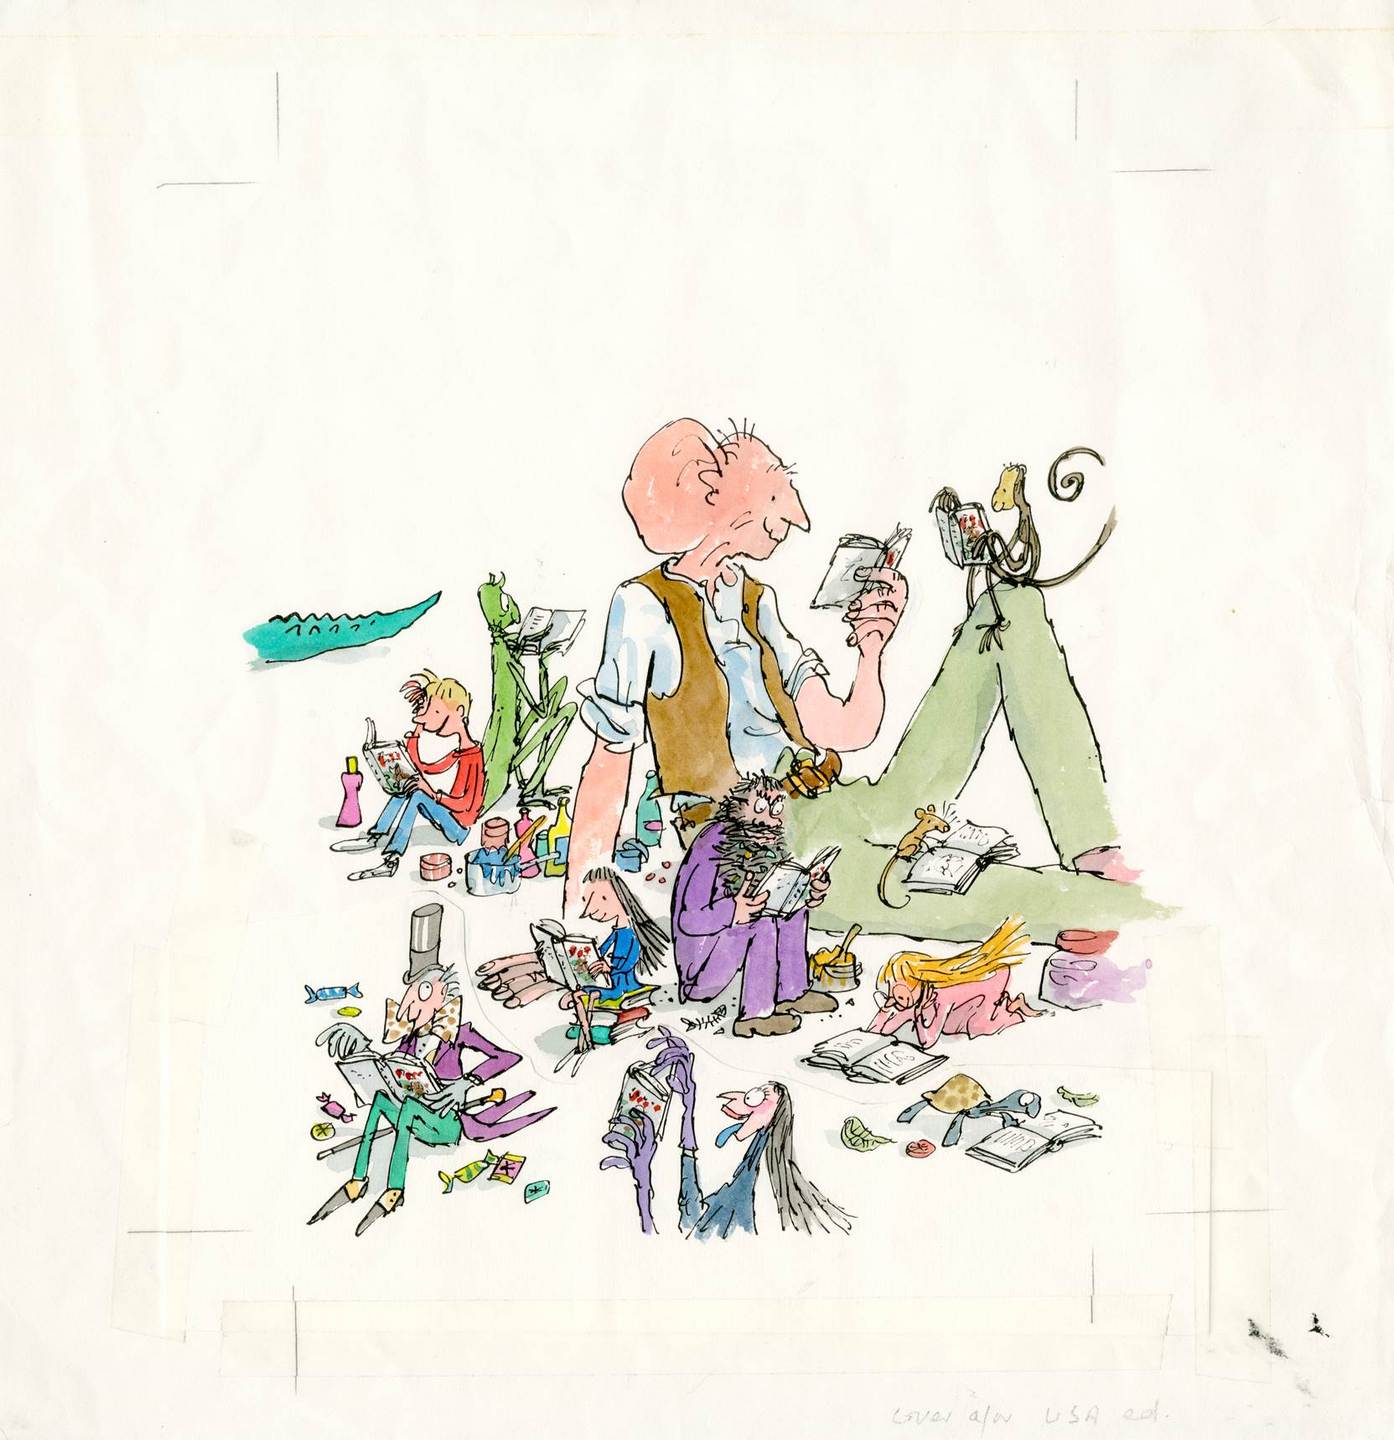 The illustrations that brought Roald Dahl's books to life